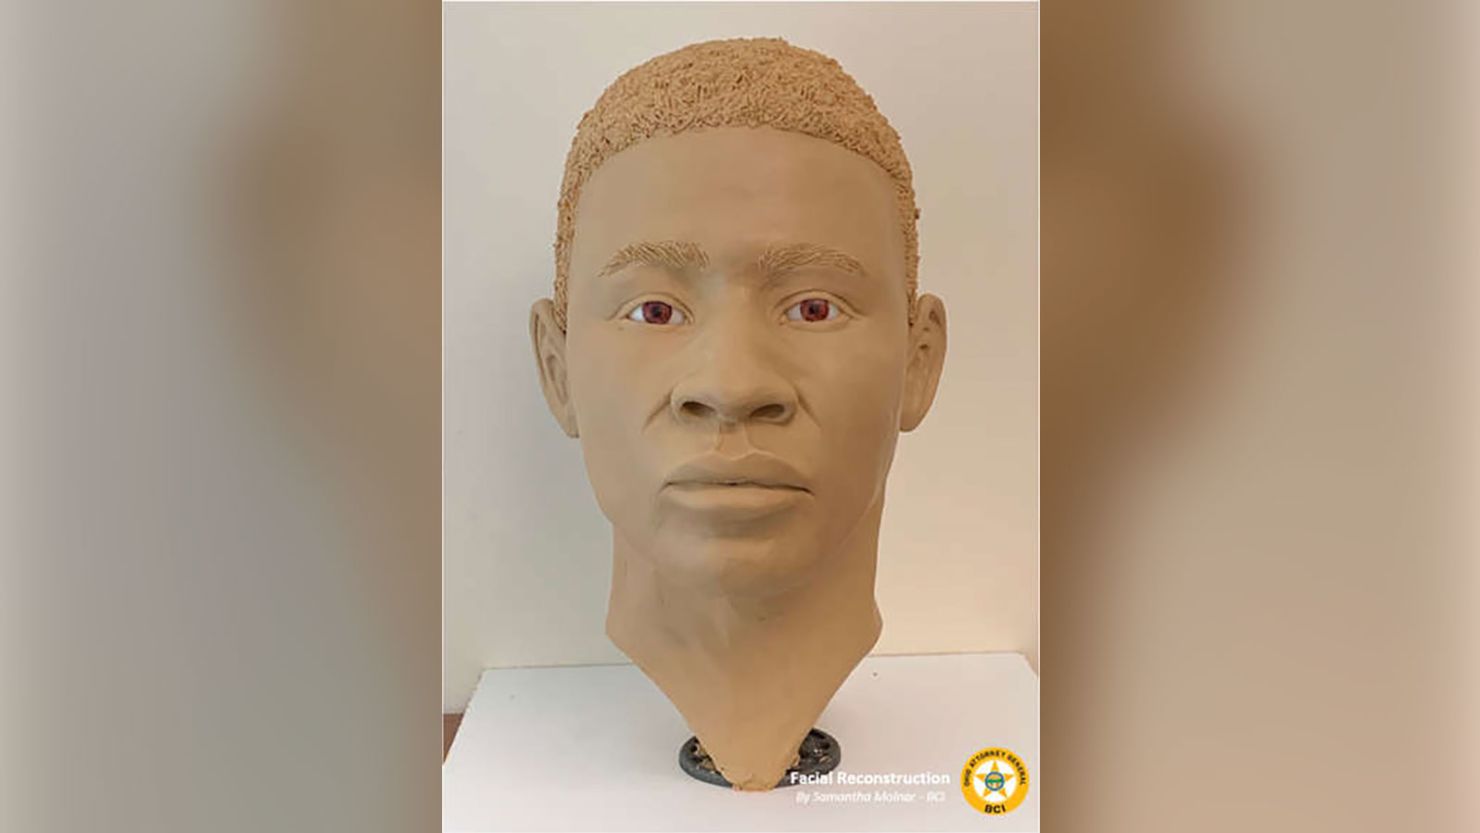 Officials are hoping a clay facial reconstruction may elicit new tips to help identify a cold case subject.